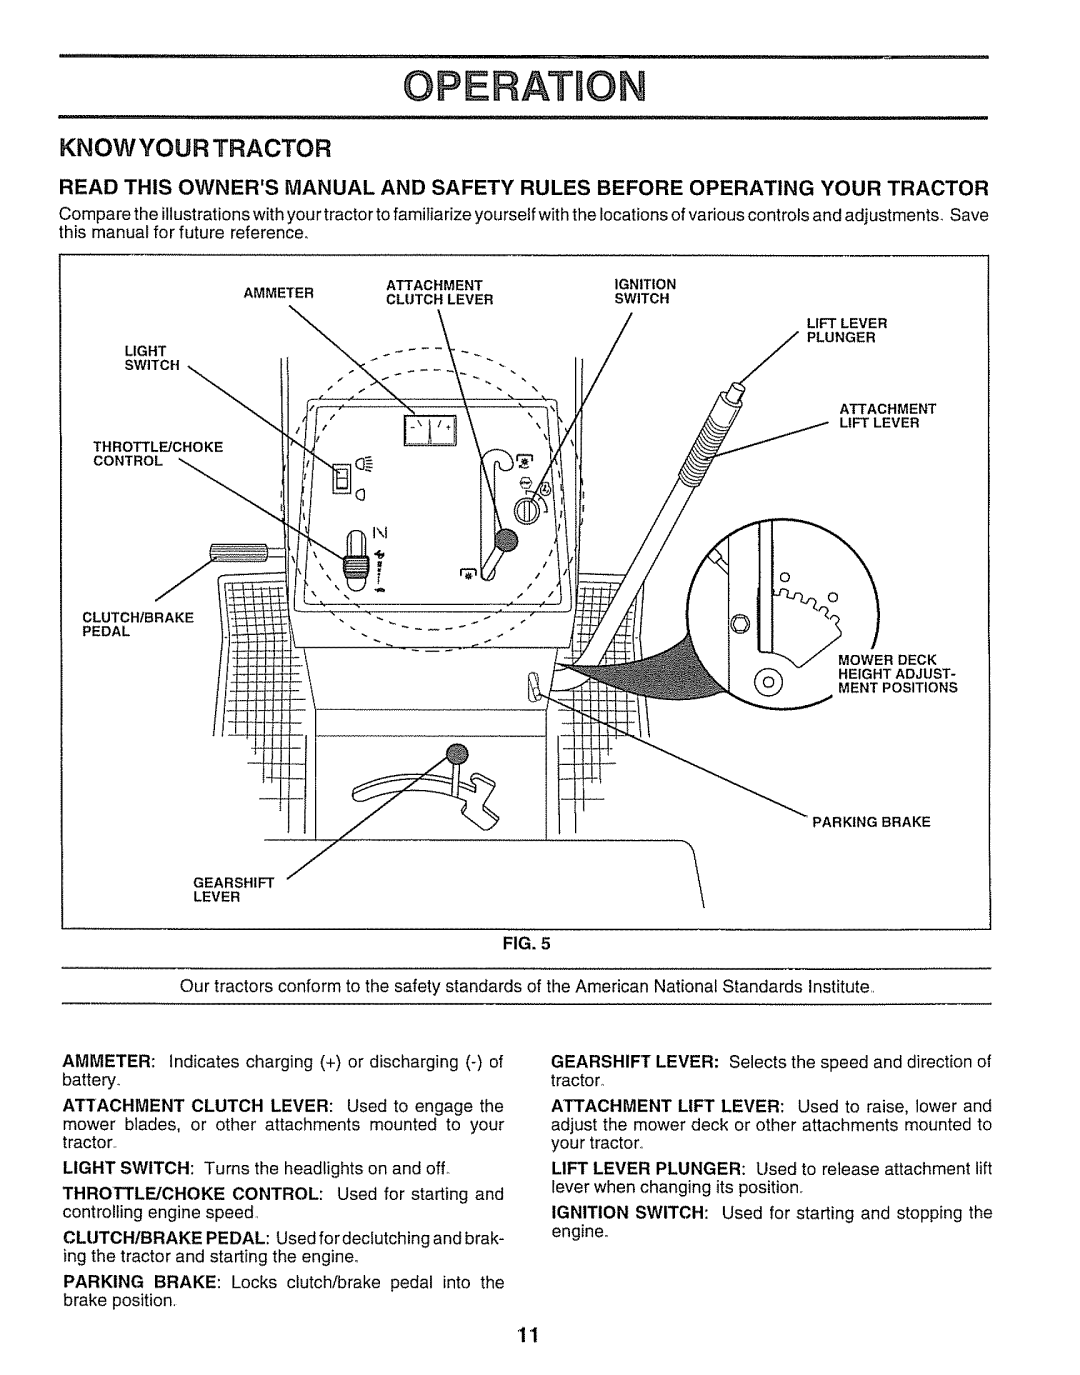 Craftsman 917.25651 owner manual OPERATmO, Knowyourtractor 